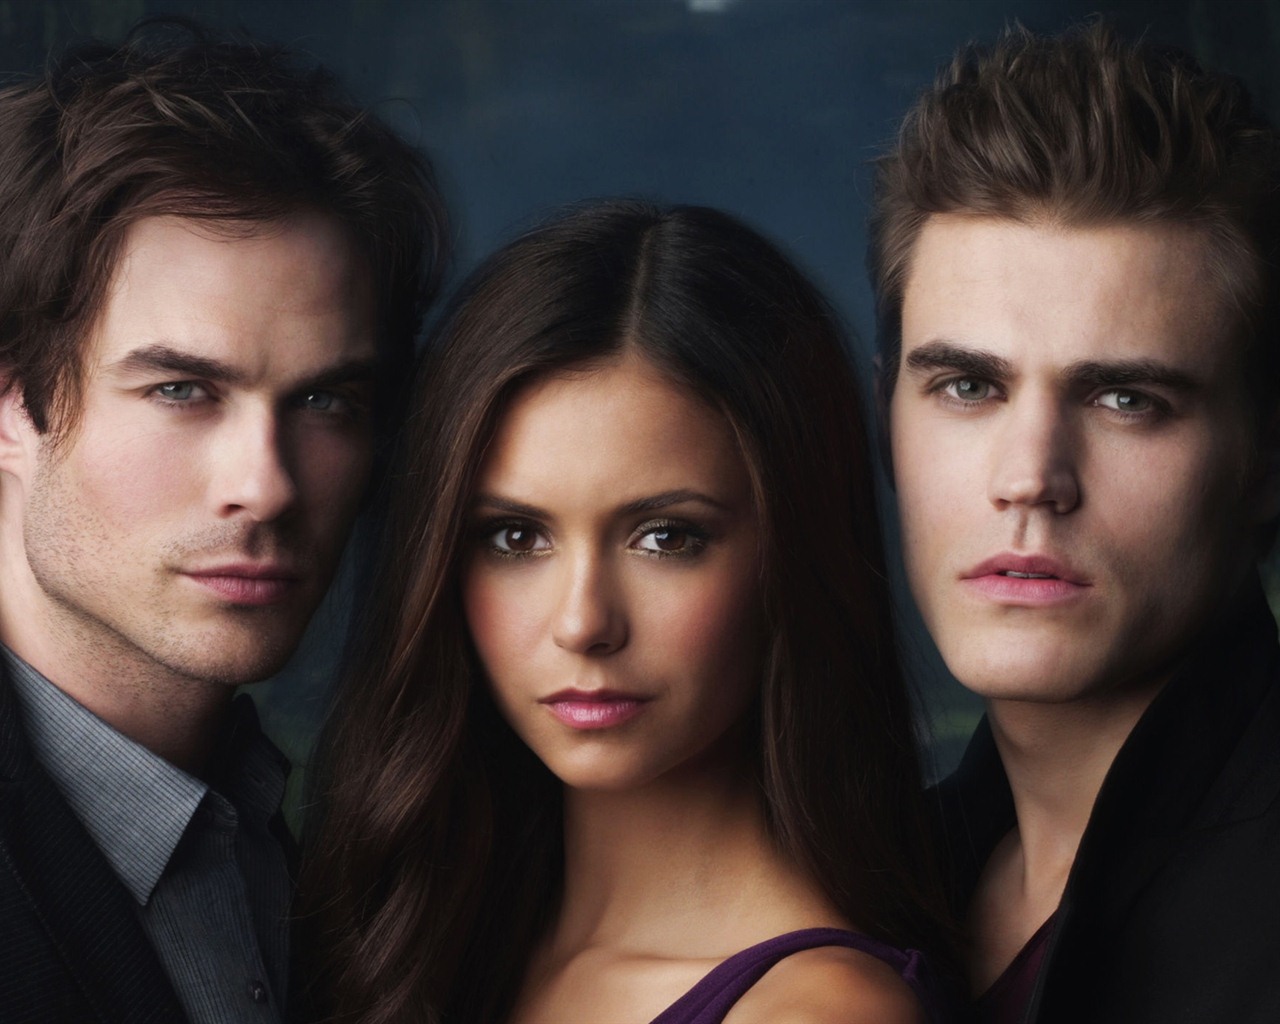 The Vampire Diaries HD Wallpapers #4 - 1280x1024